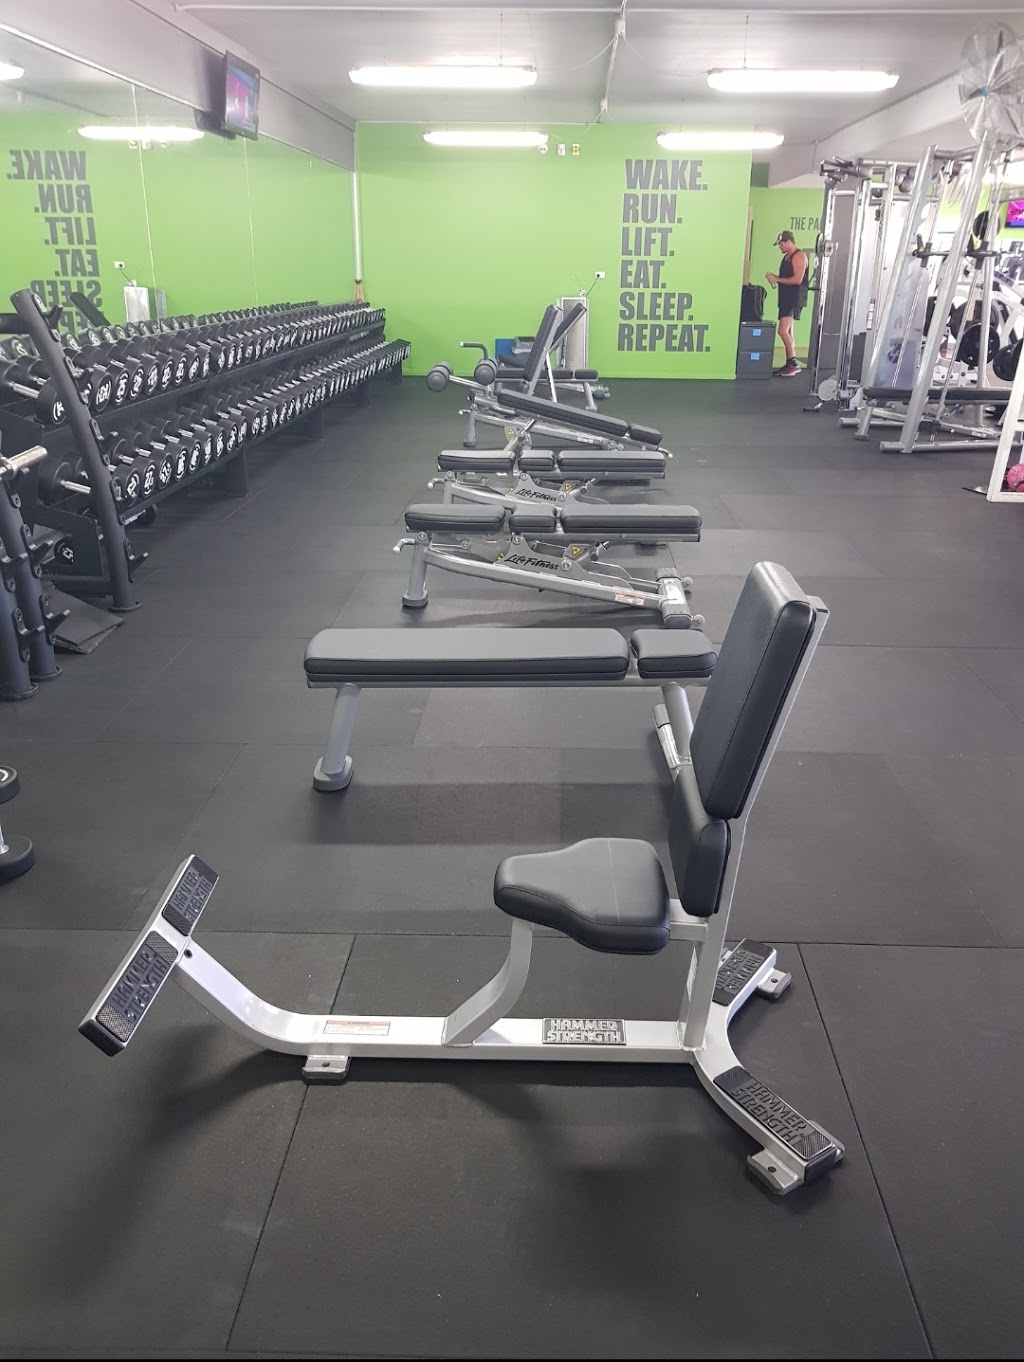 Marquee Fitness 24/7 | gym | 252 Pacific Hwy, Coffs Harbour NSW 2450, Australia | 0266513254 OR +61 2 6651 3254